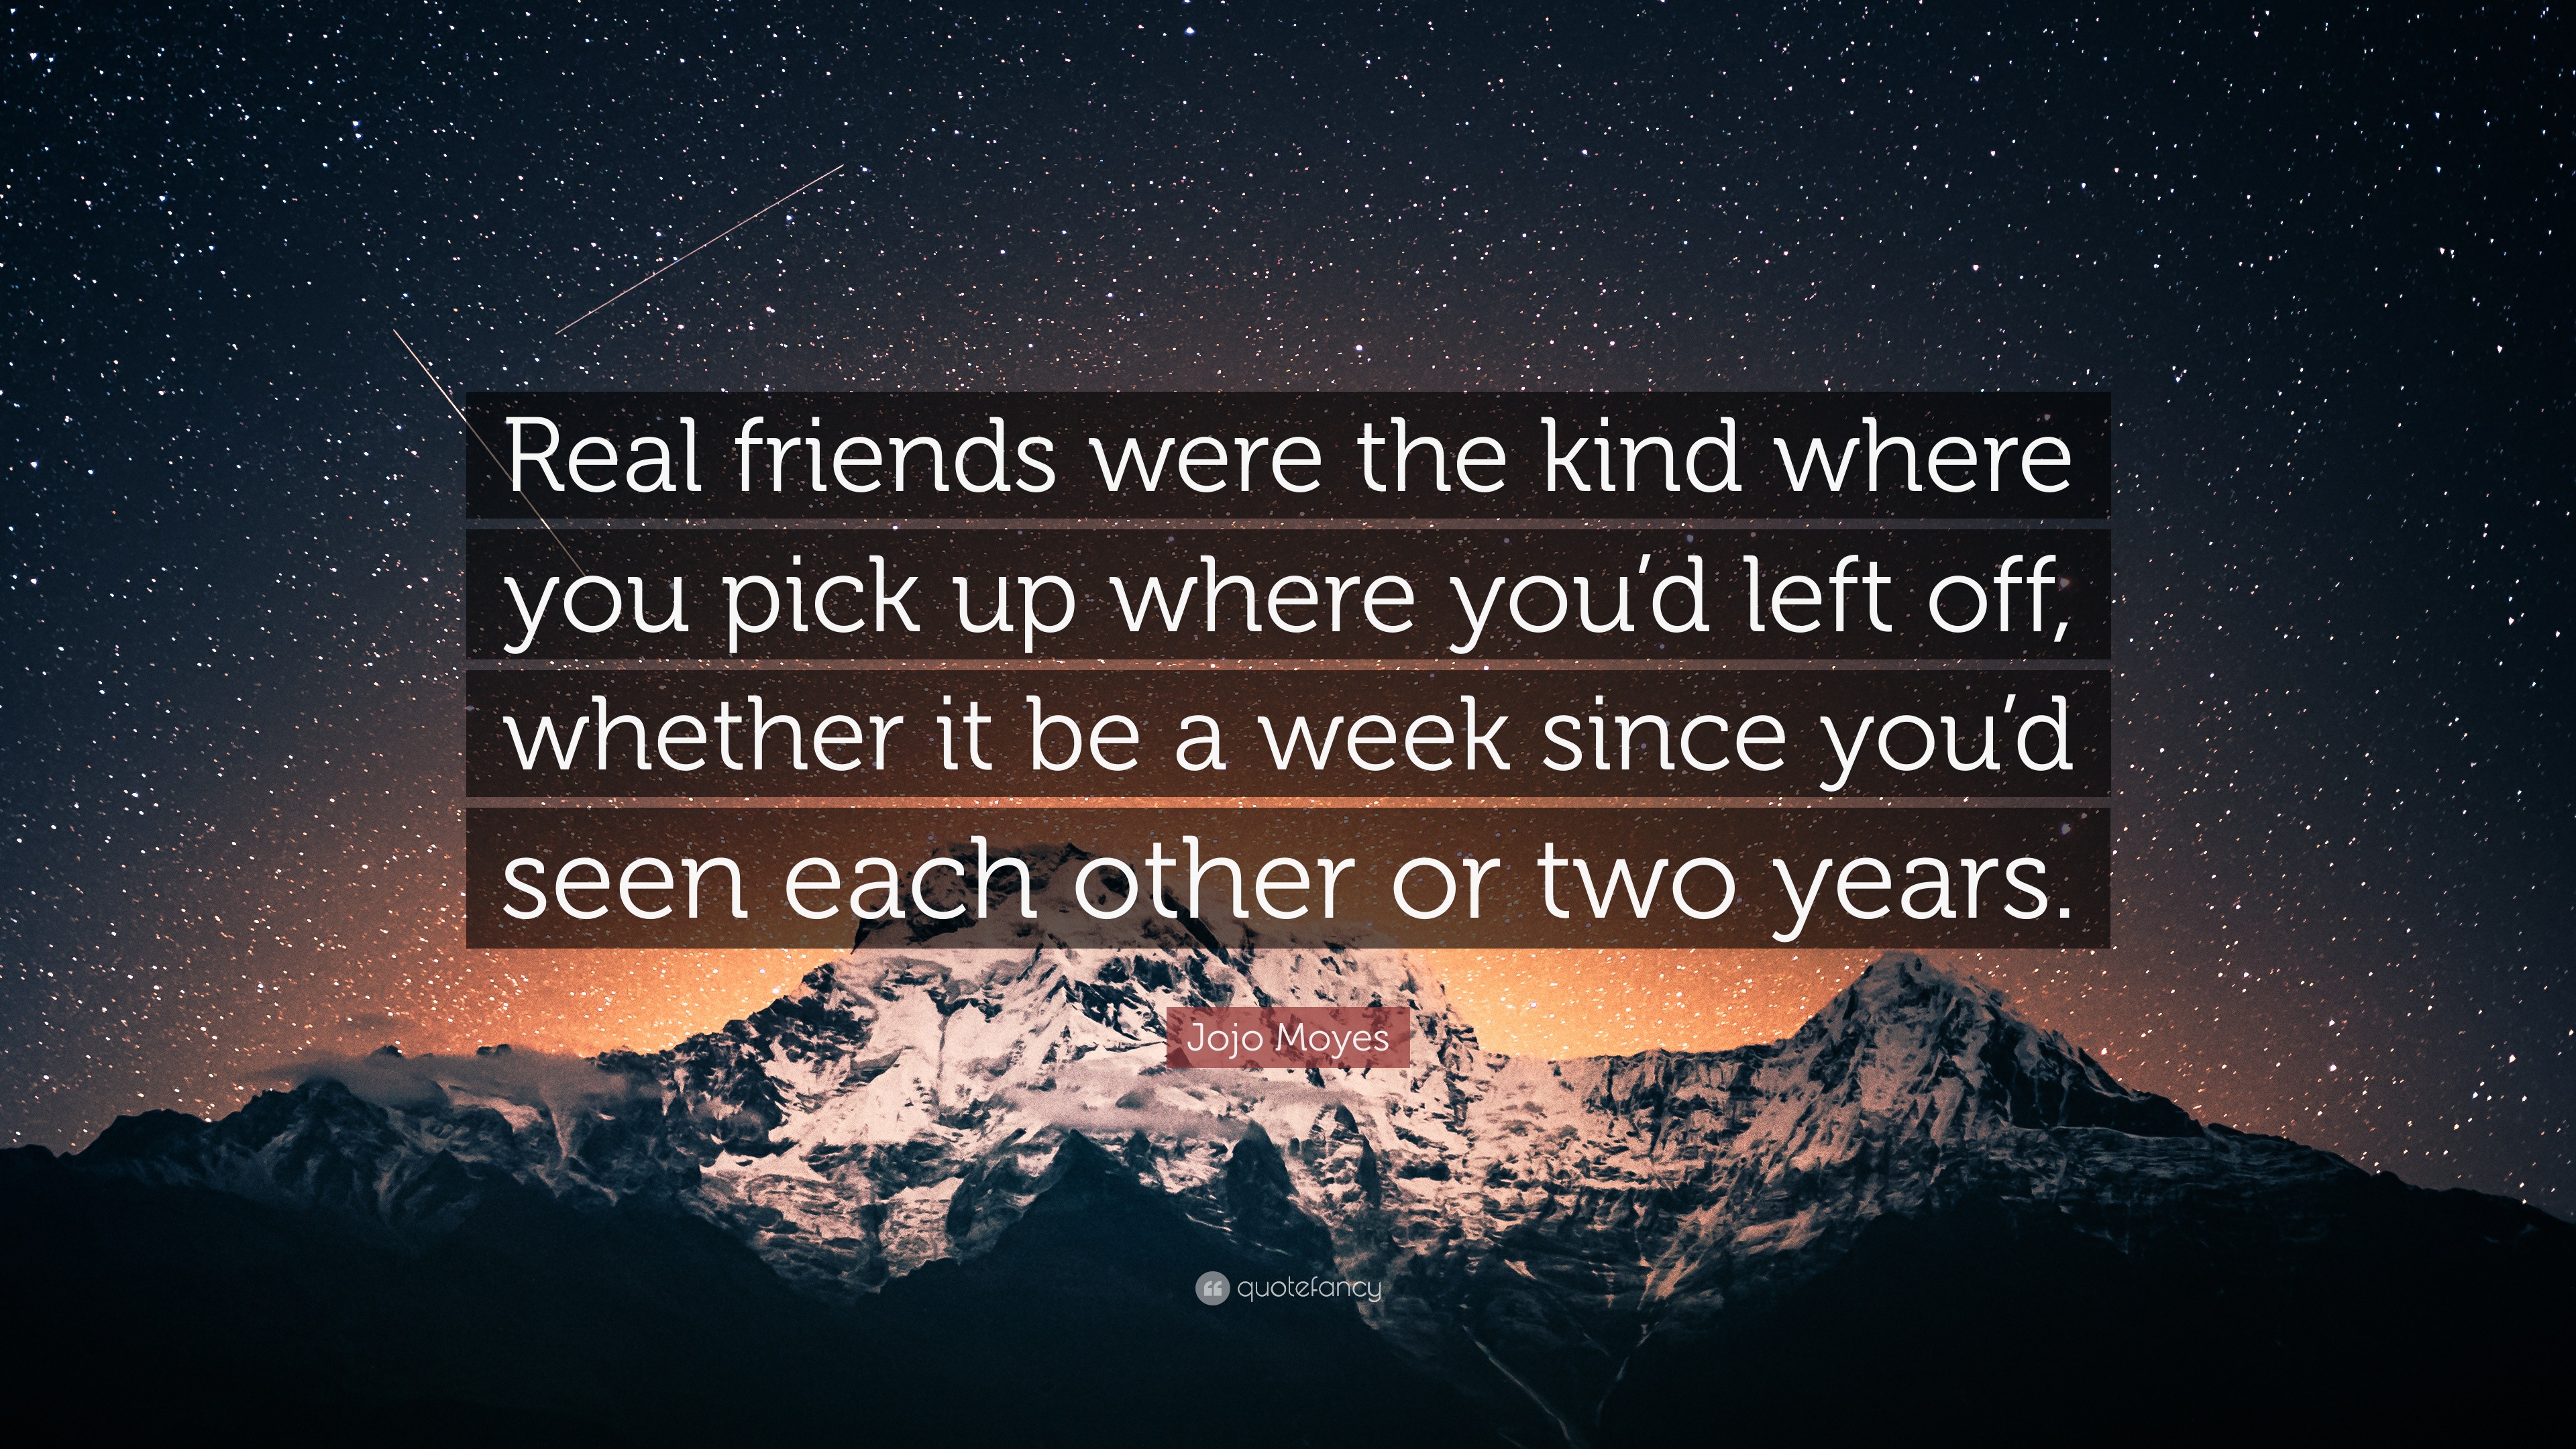 Jojo Moyes Quote: “Real friends were the kind where you pick up where ...